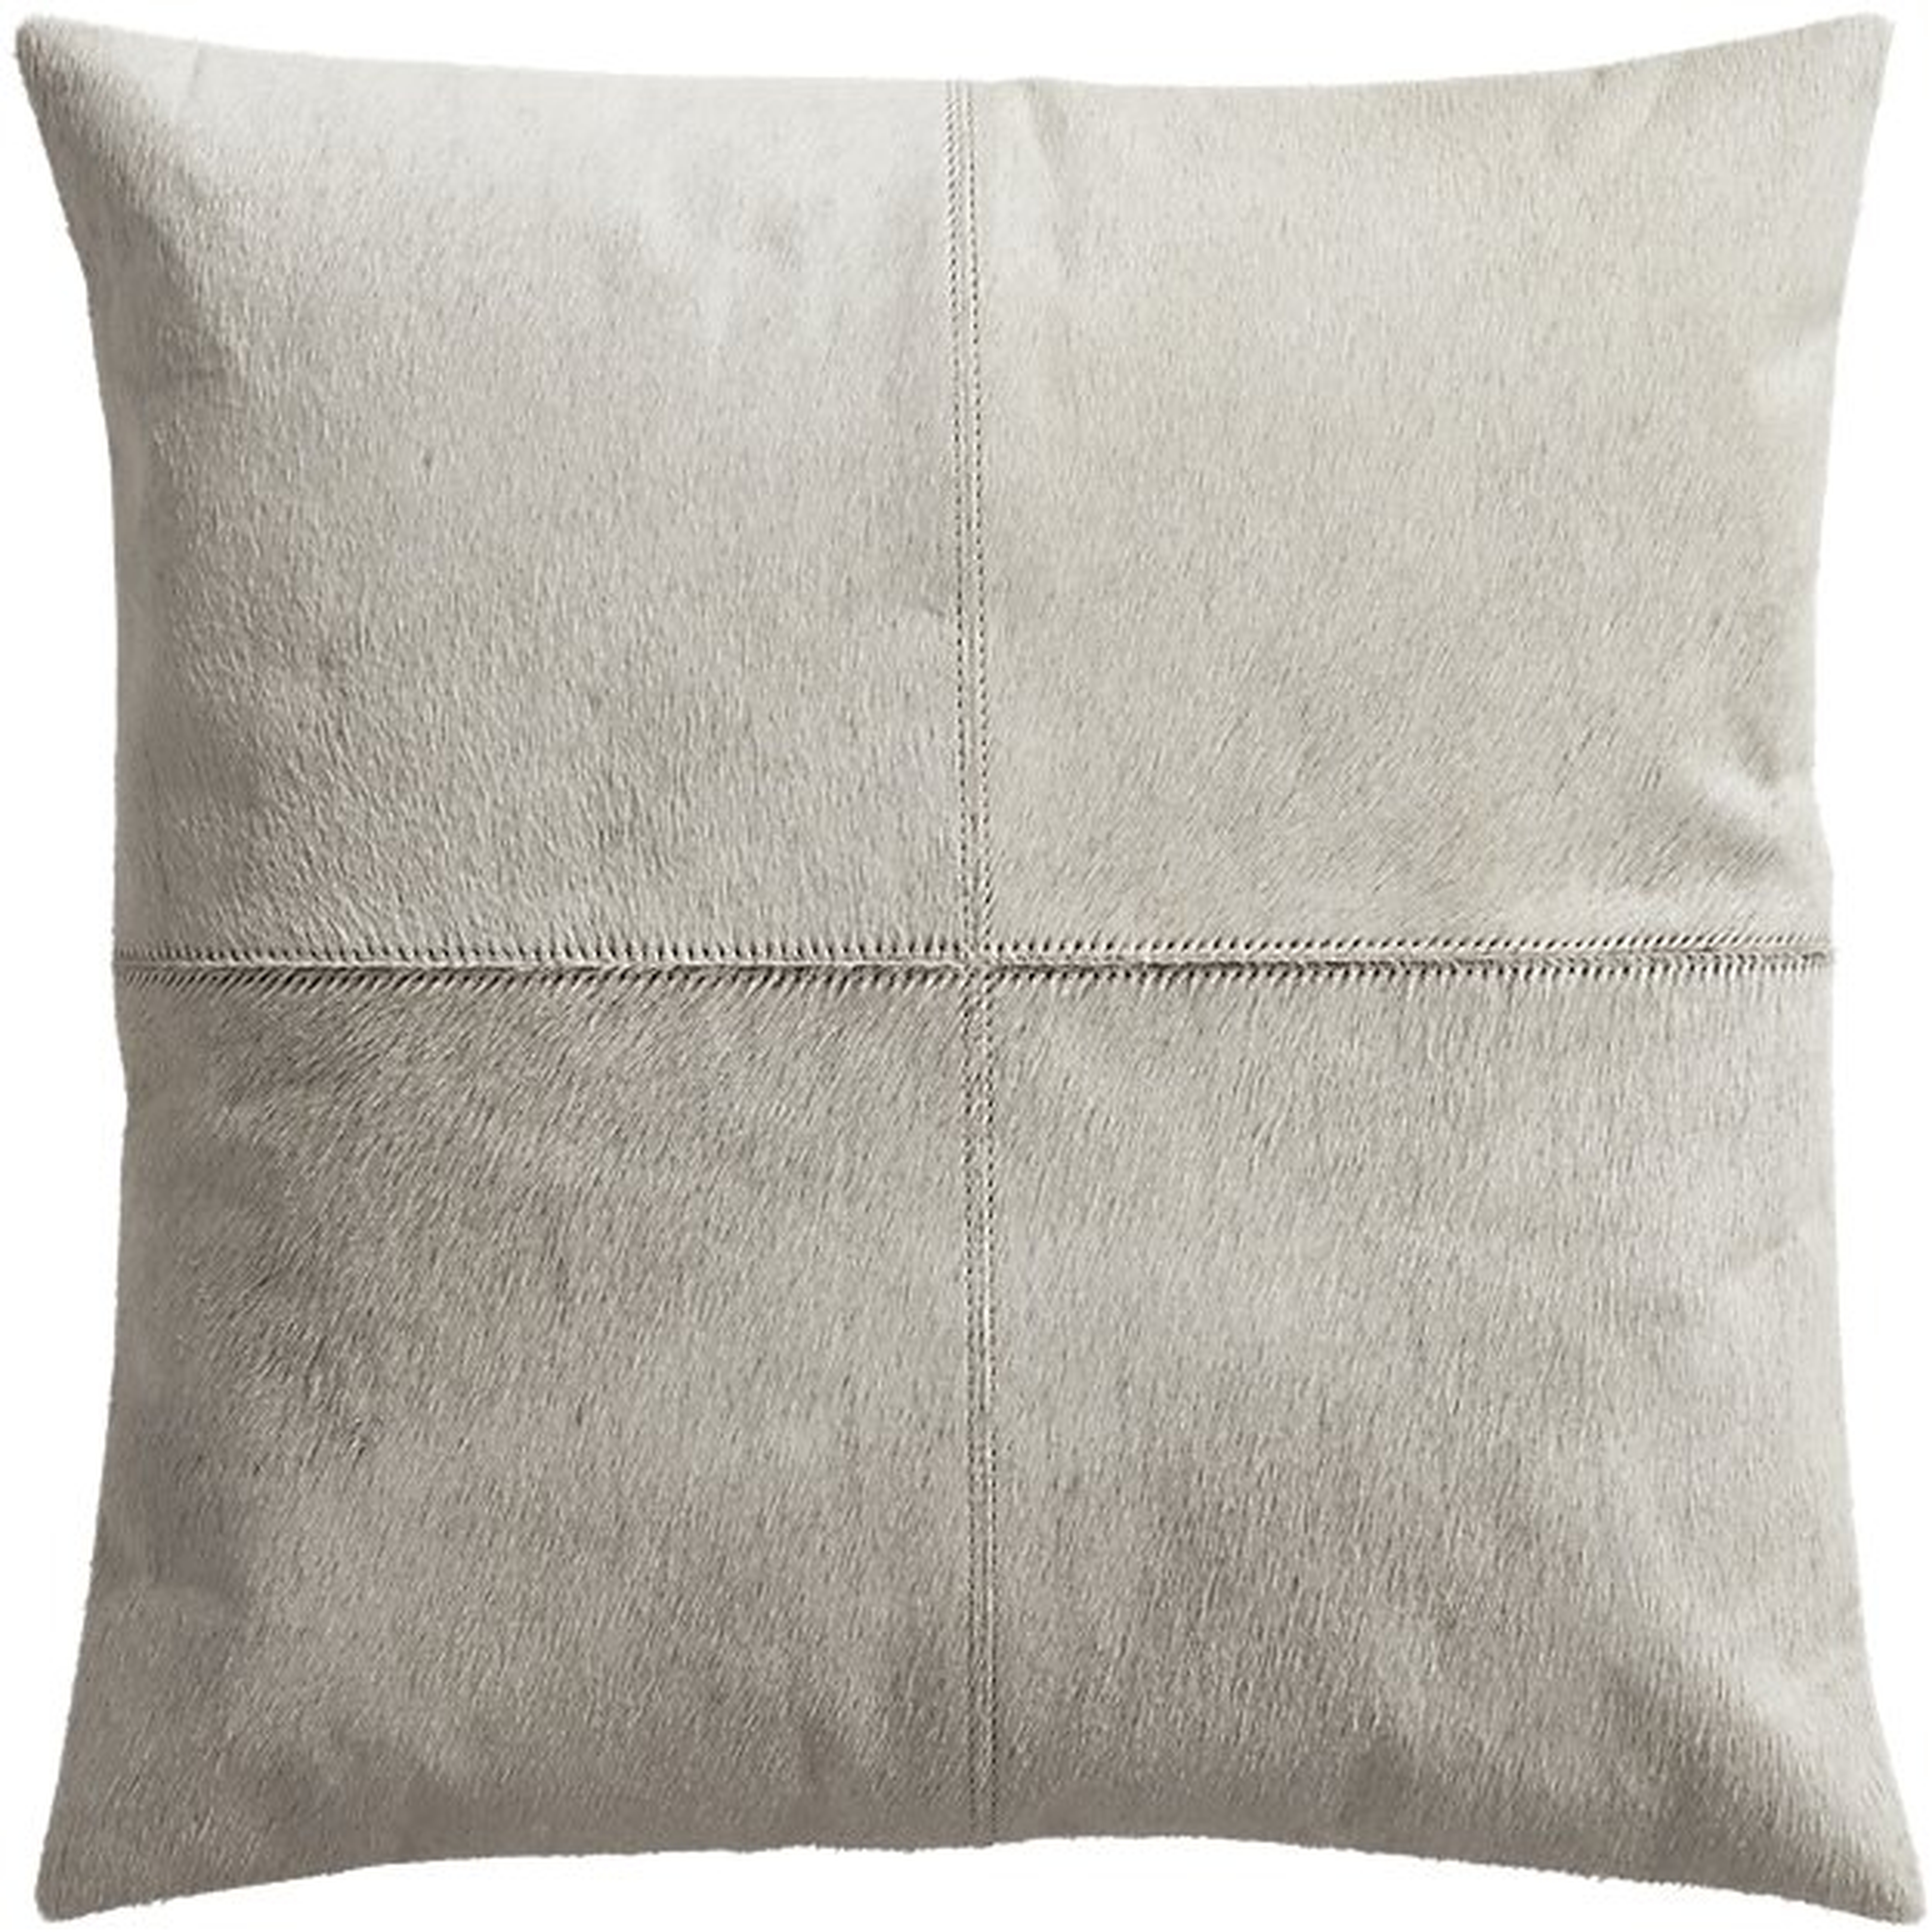 18" abele white cowhide pillow with down-alternative insert - CB2